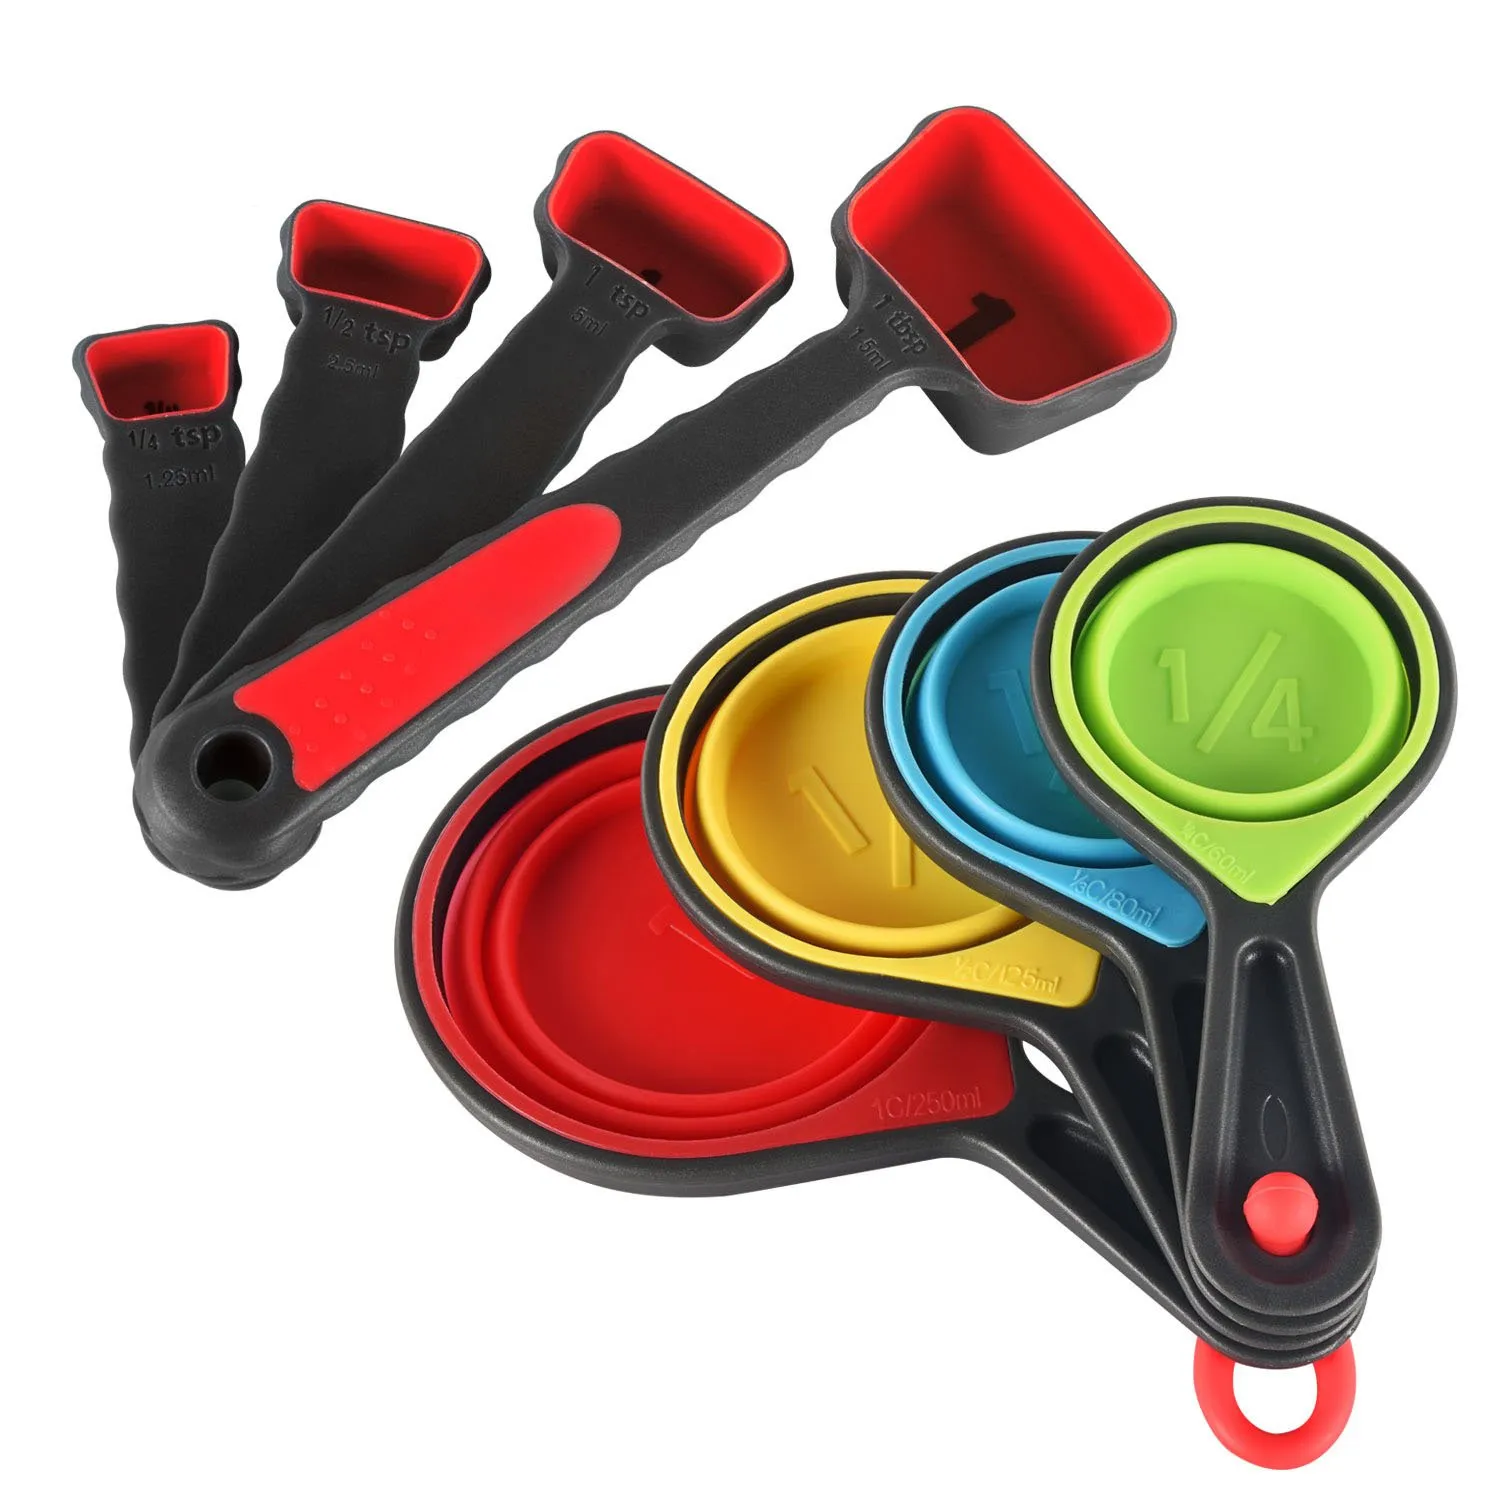 Silicone Collapsible Measuring Cups and Spoons for Dry and Liquid